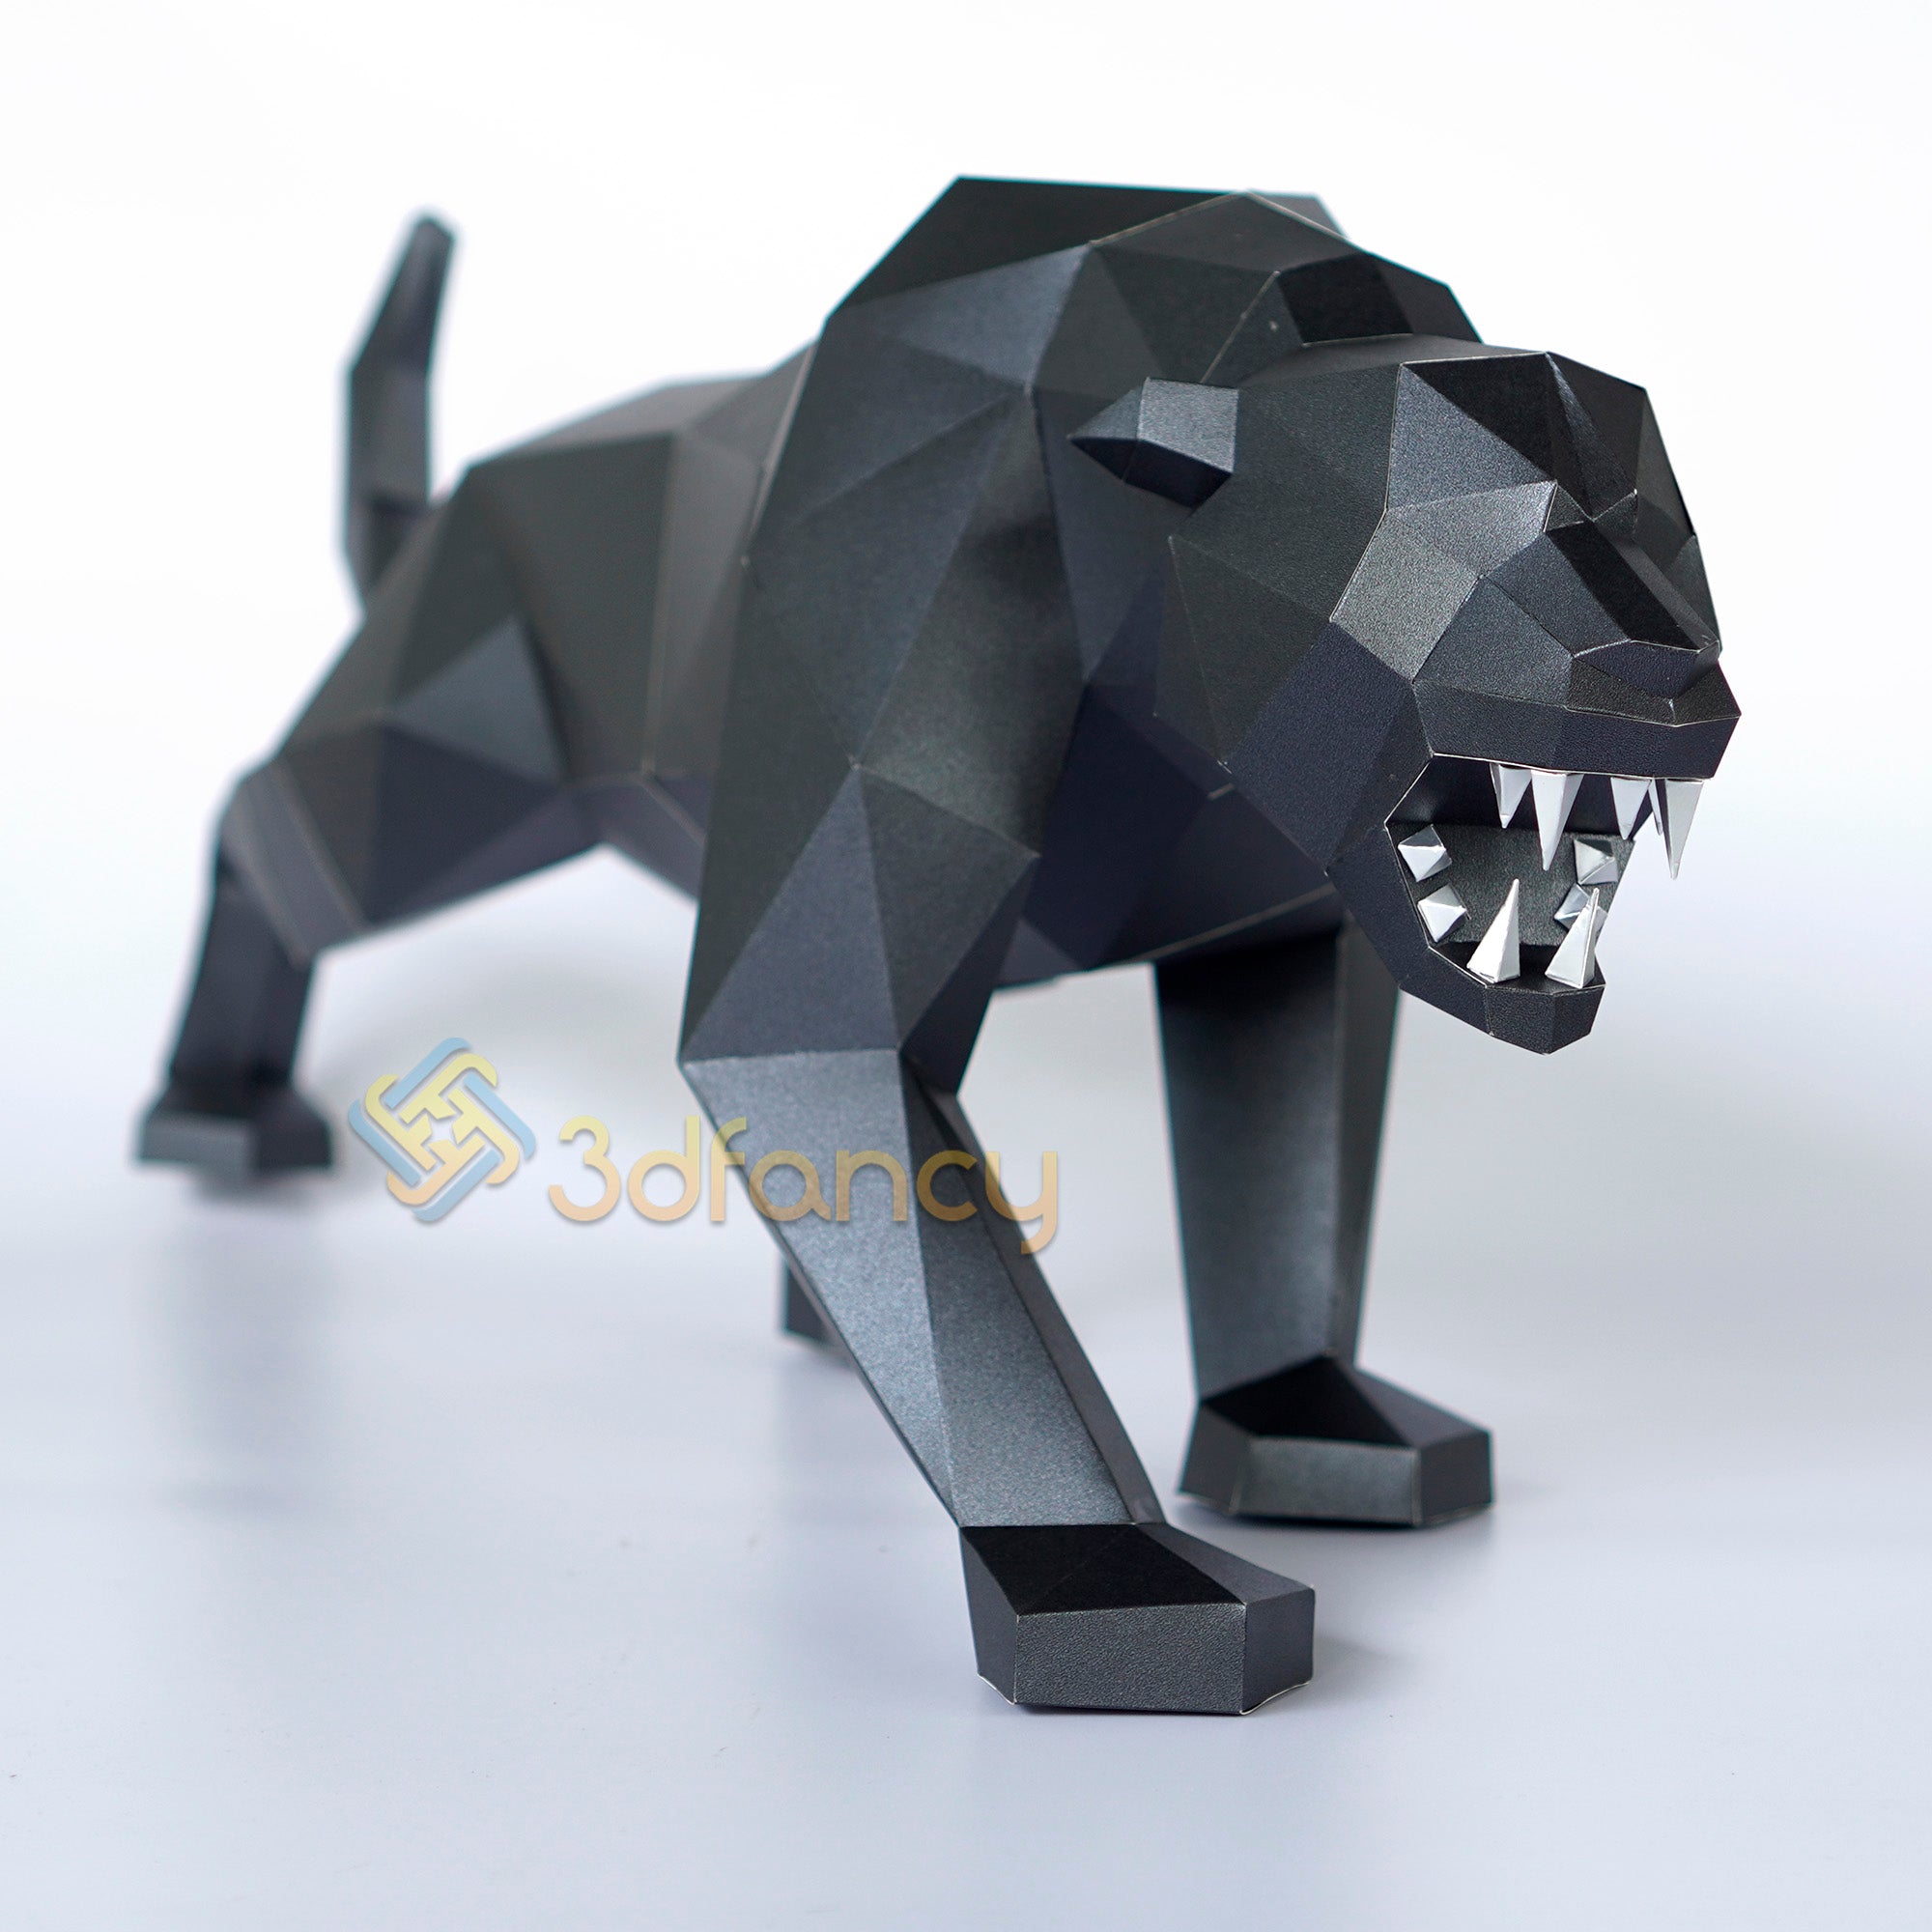 Black Panther Paper Craft Low Poly Animals Model - PDF, SVG Template Compatible with Cricut, Cameo 4, Scanncut